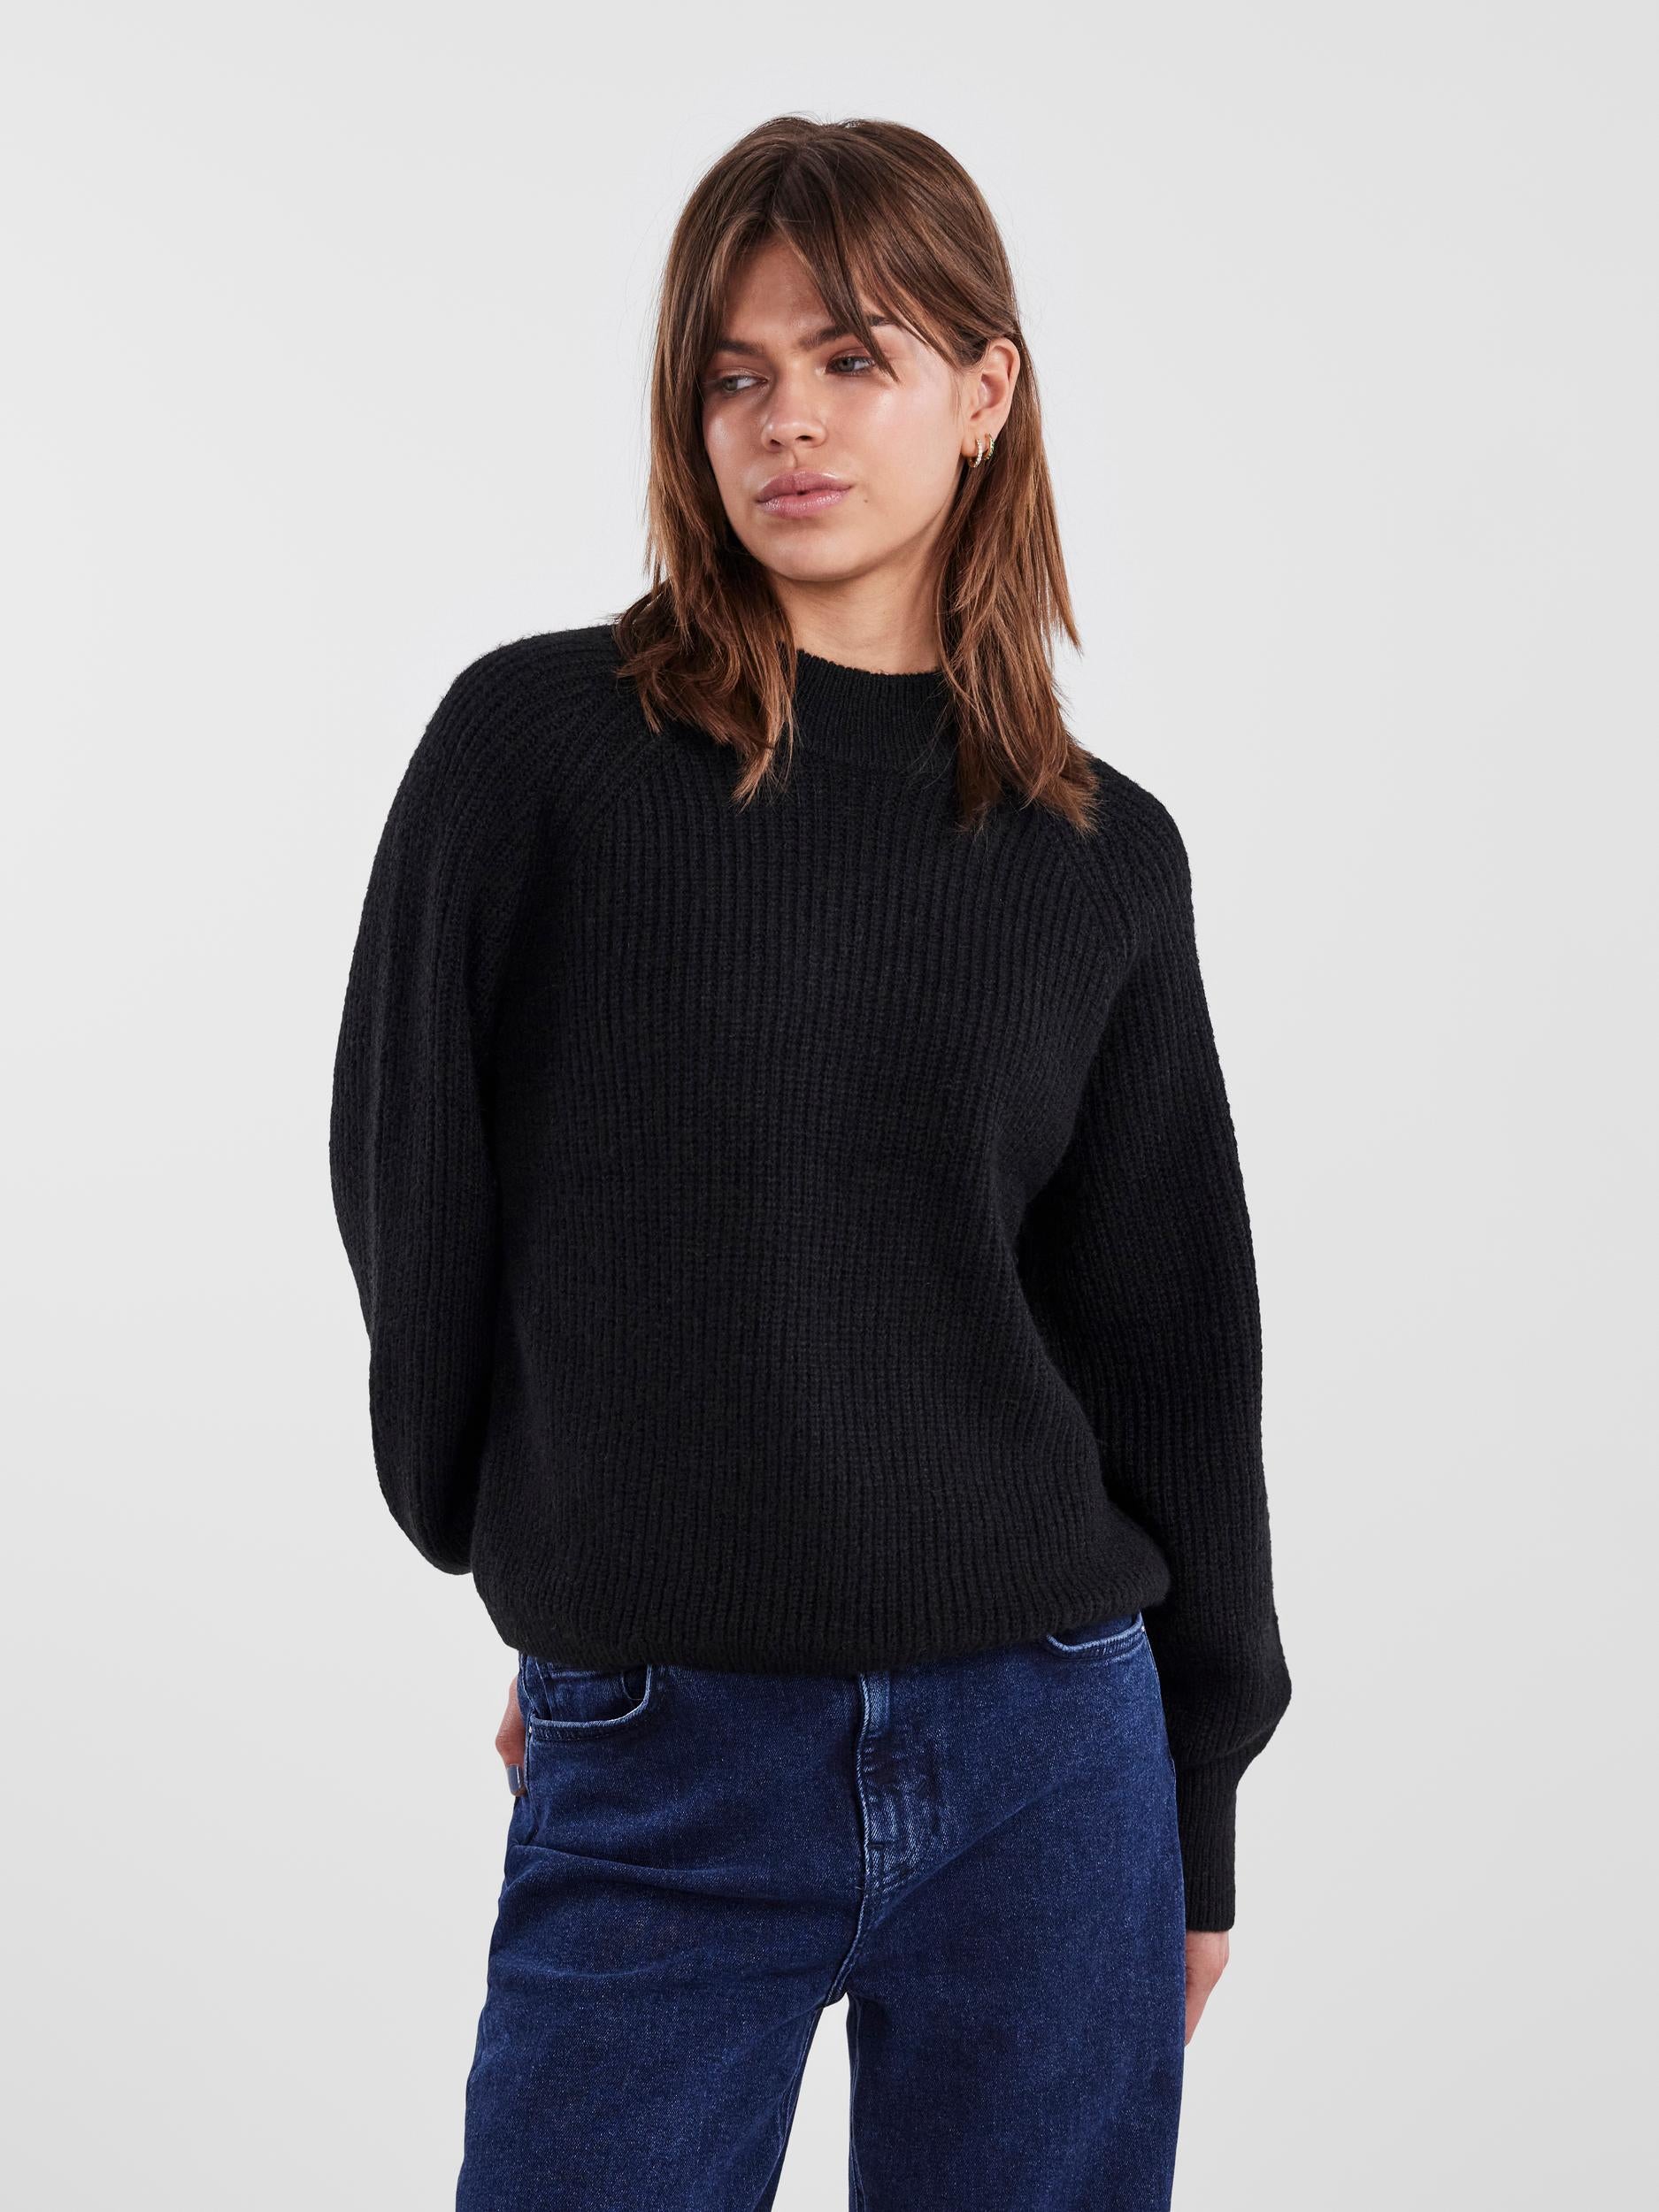 Pieces black crew neck knitted sweater